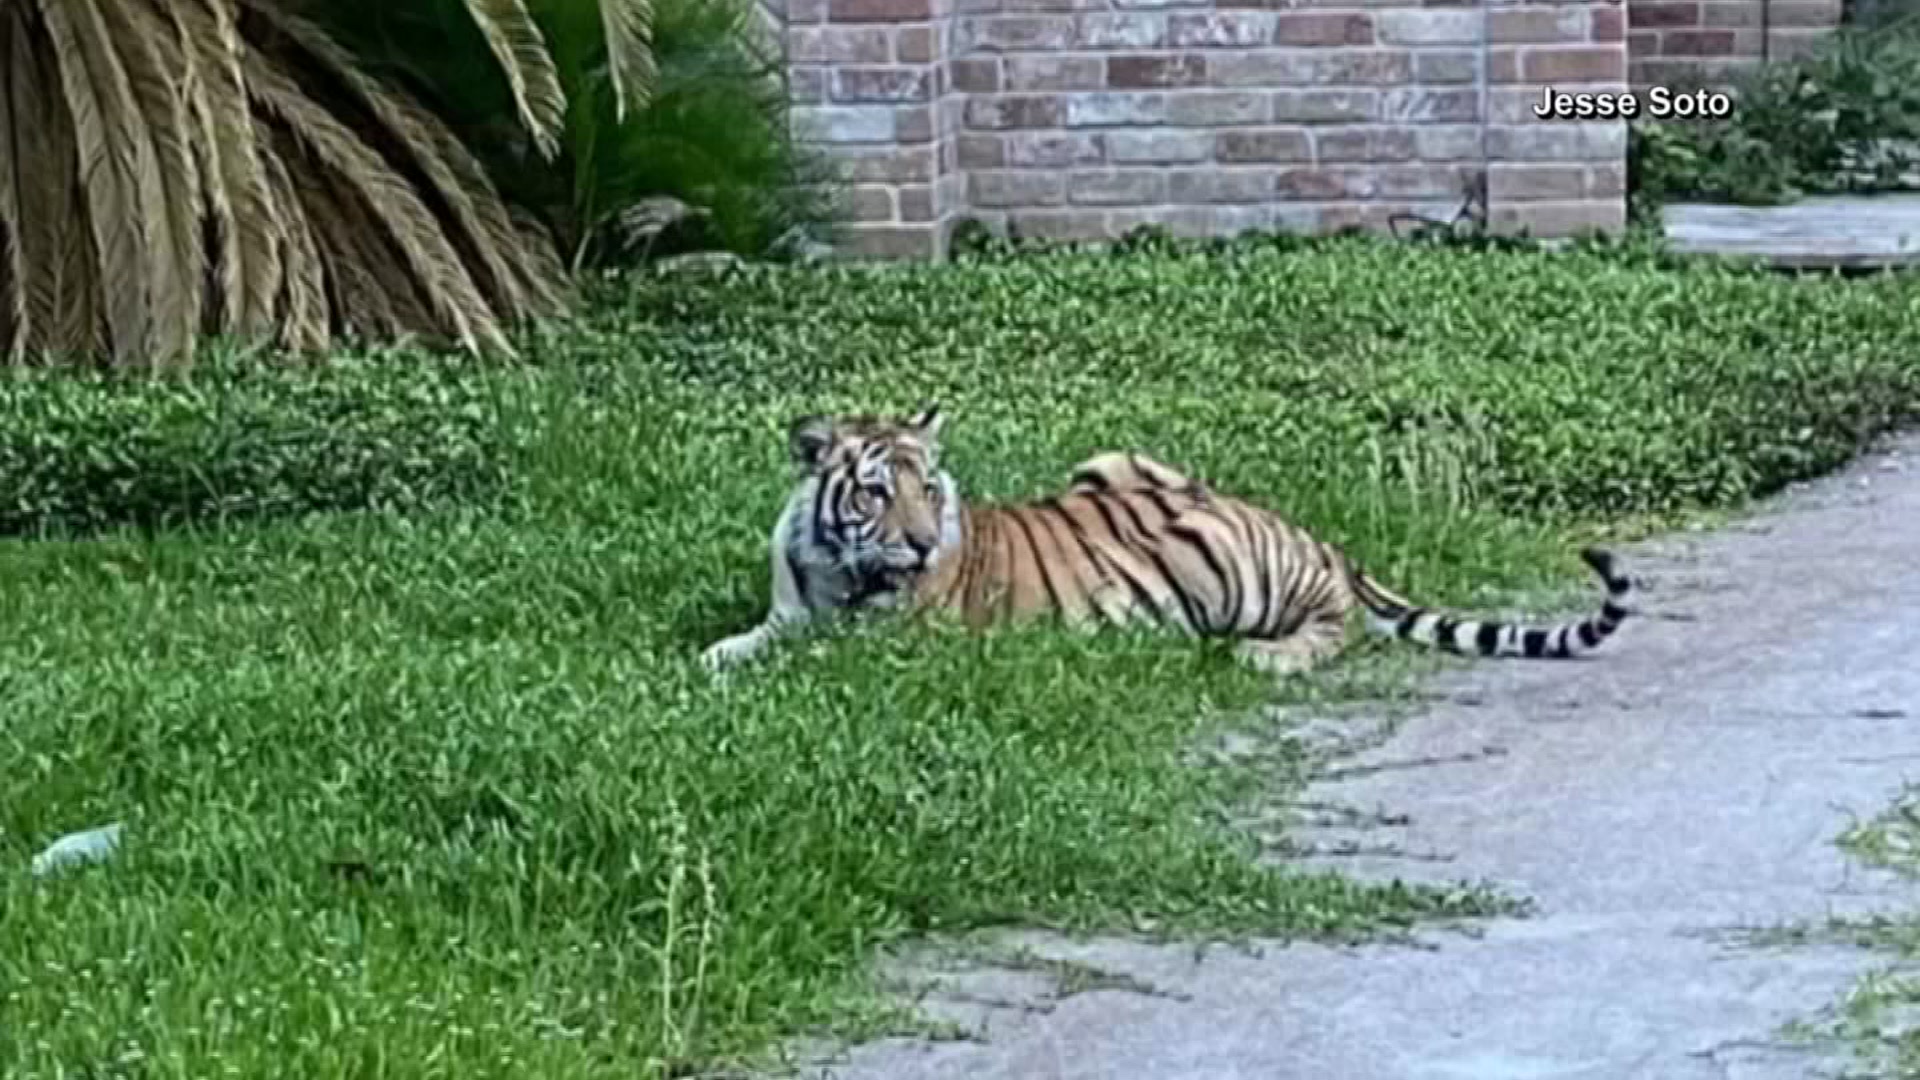 Owner Arrested After Tiger Seen Running Free in Texas Neighborhood